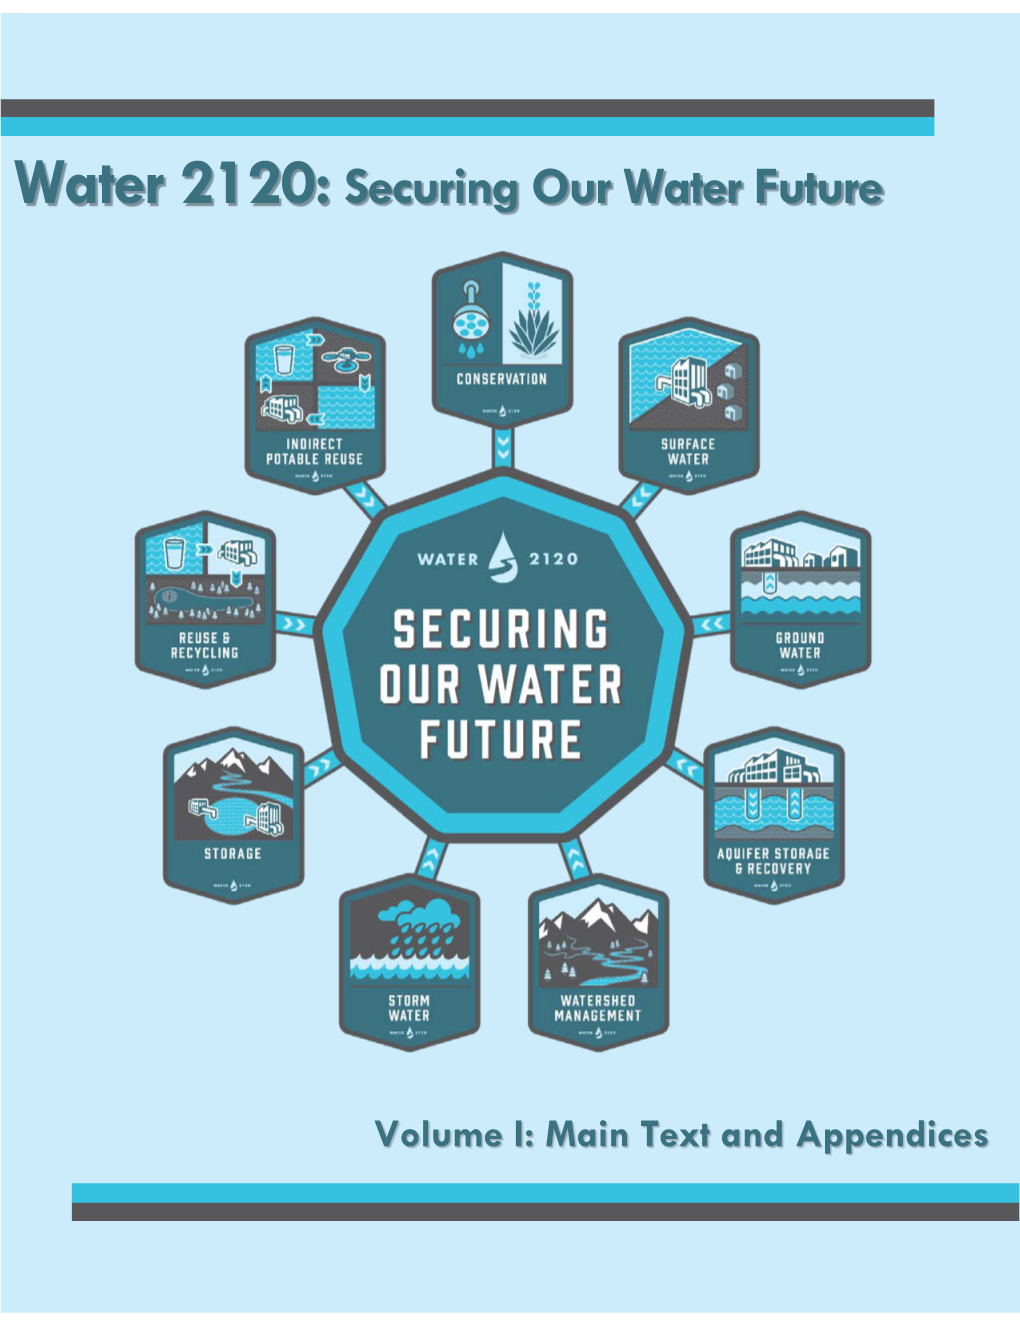 Water 2120: Securing Our Water Future